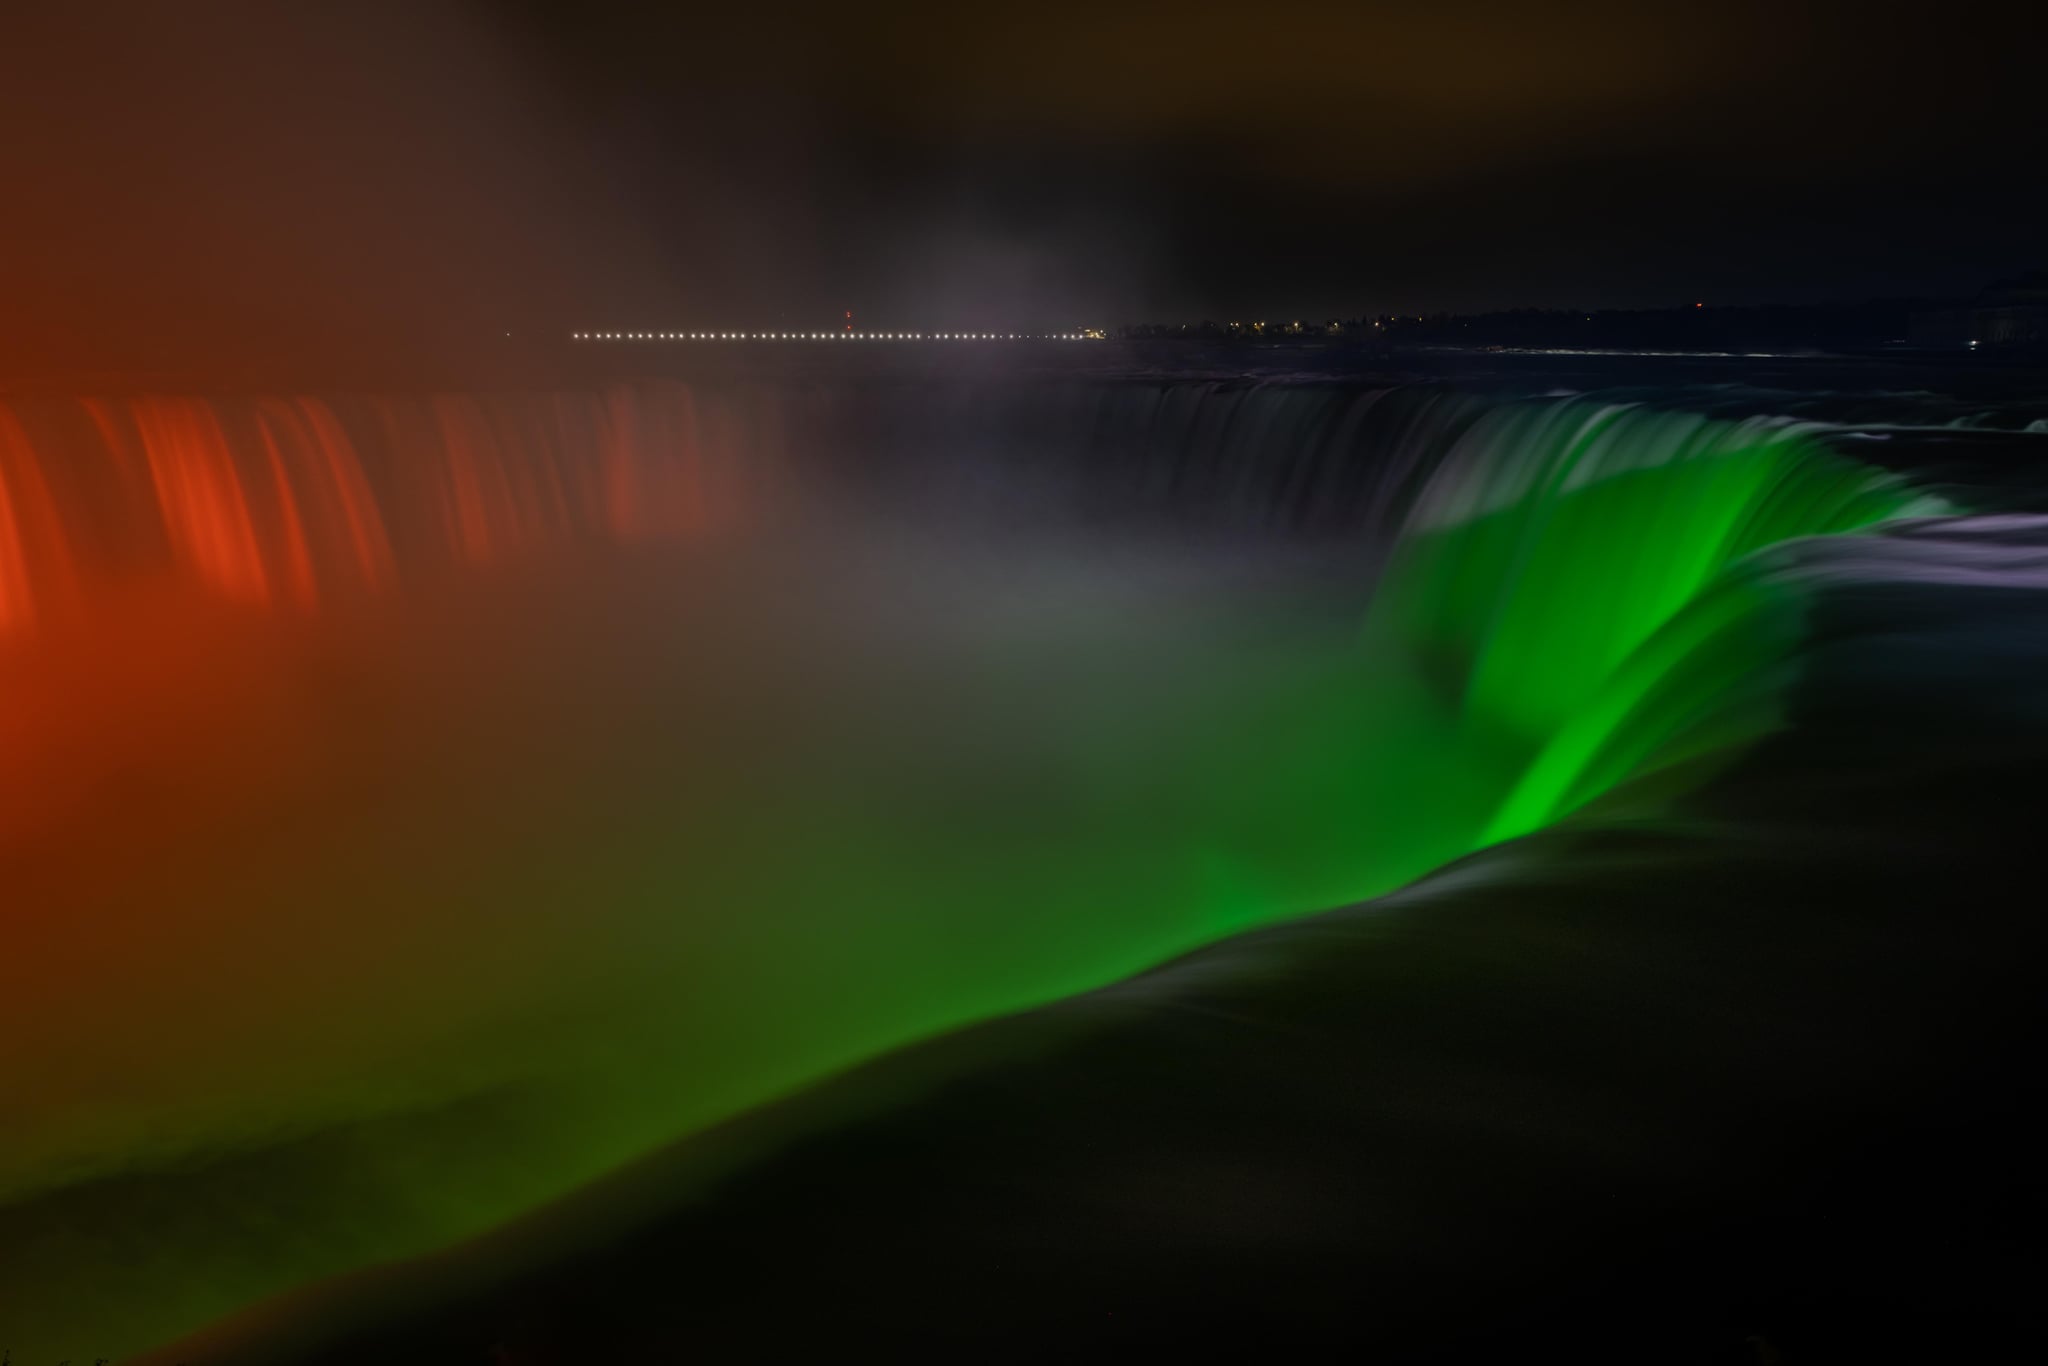 Niagara Falls to be Illuminated in Red, Green and Black for Juneteenth